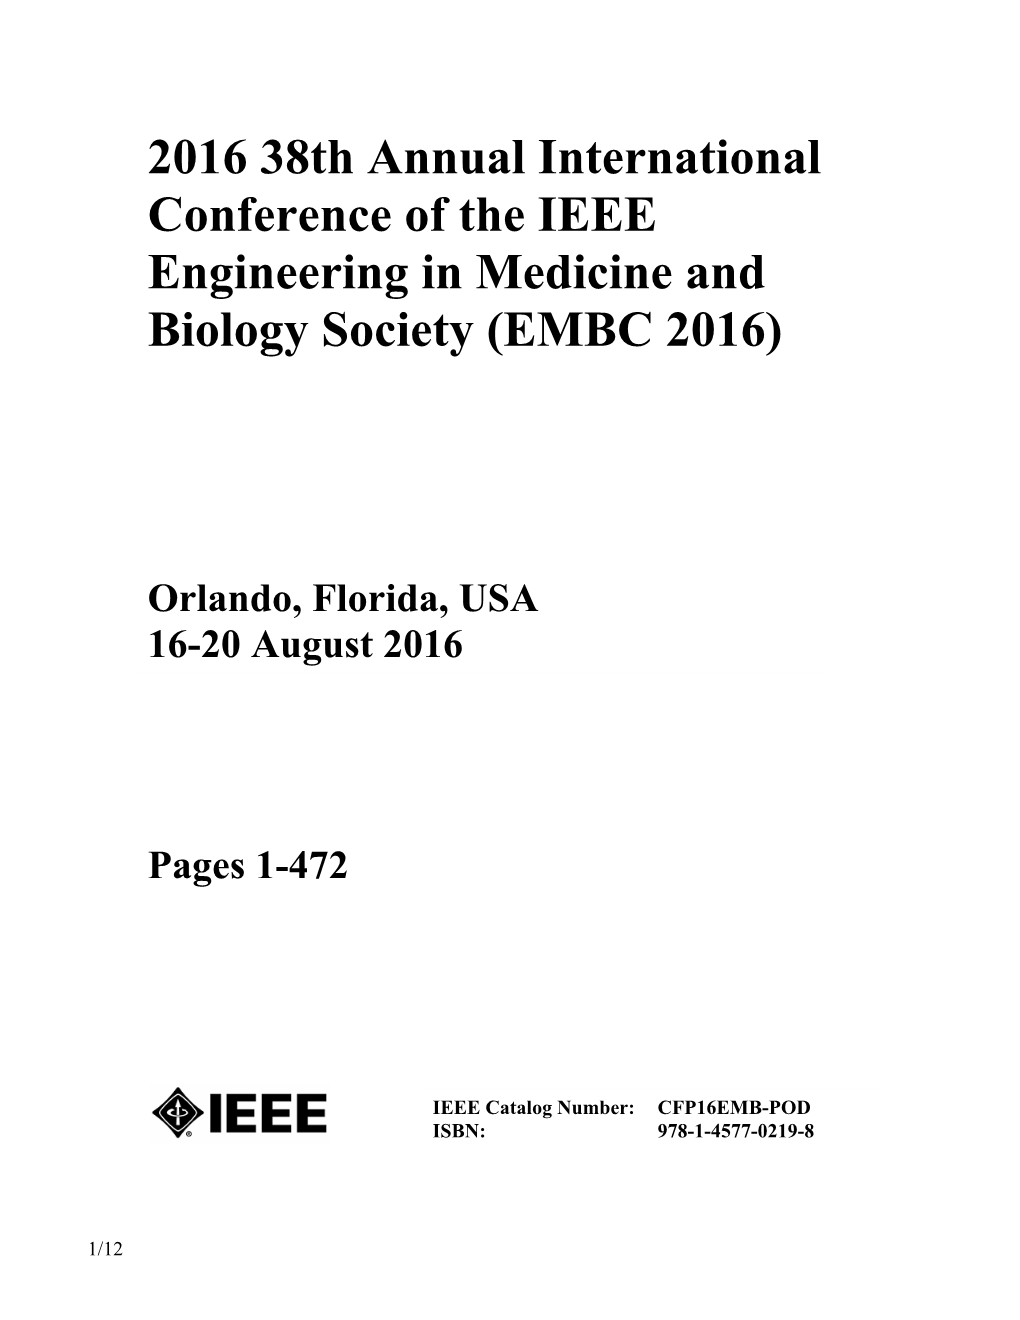 EMBC 2016 – Welcome